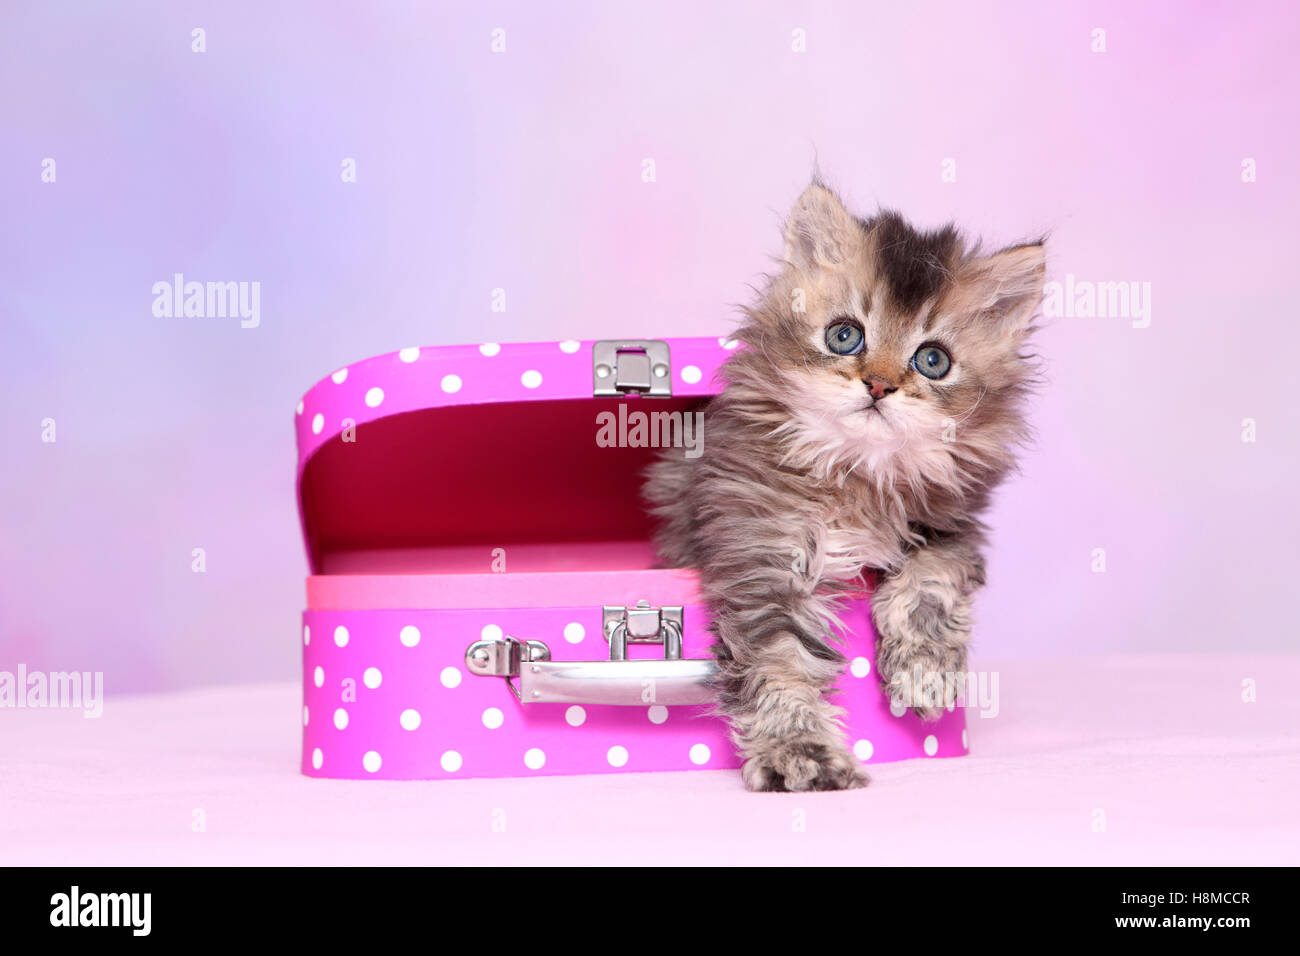 Selkirk Rex. Kitten (6 weeks old) n a pink suitcase with white polka dots. Studio picture against a pink background Stock Photo